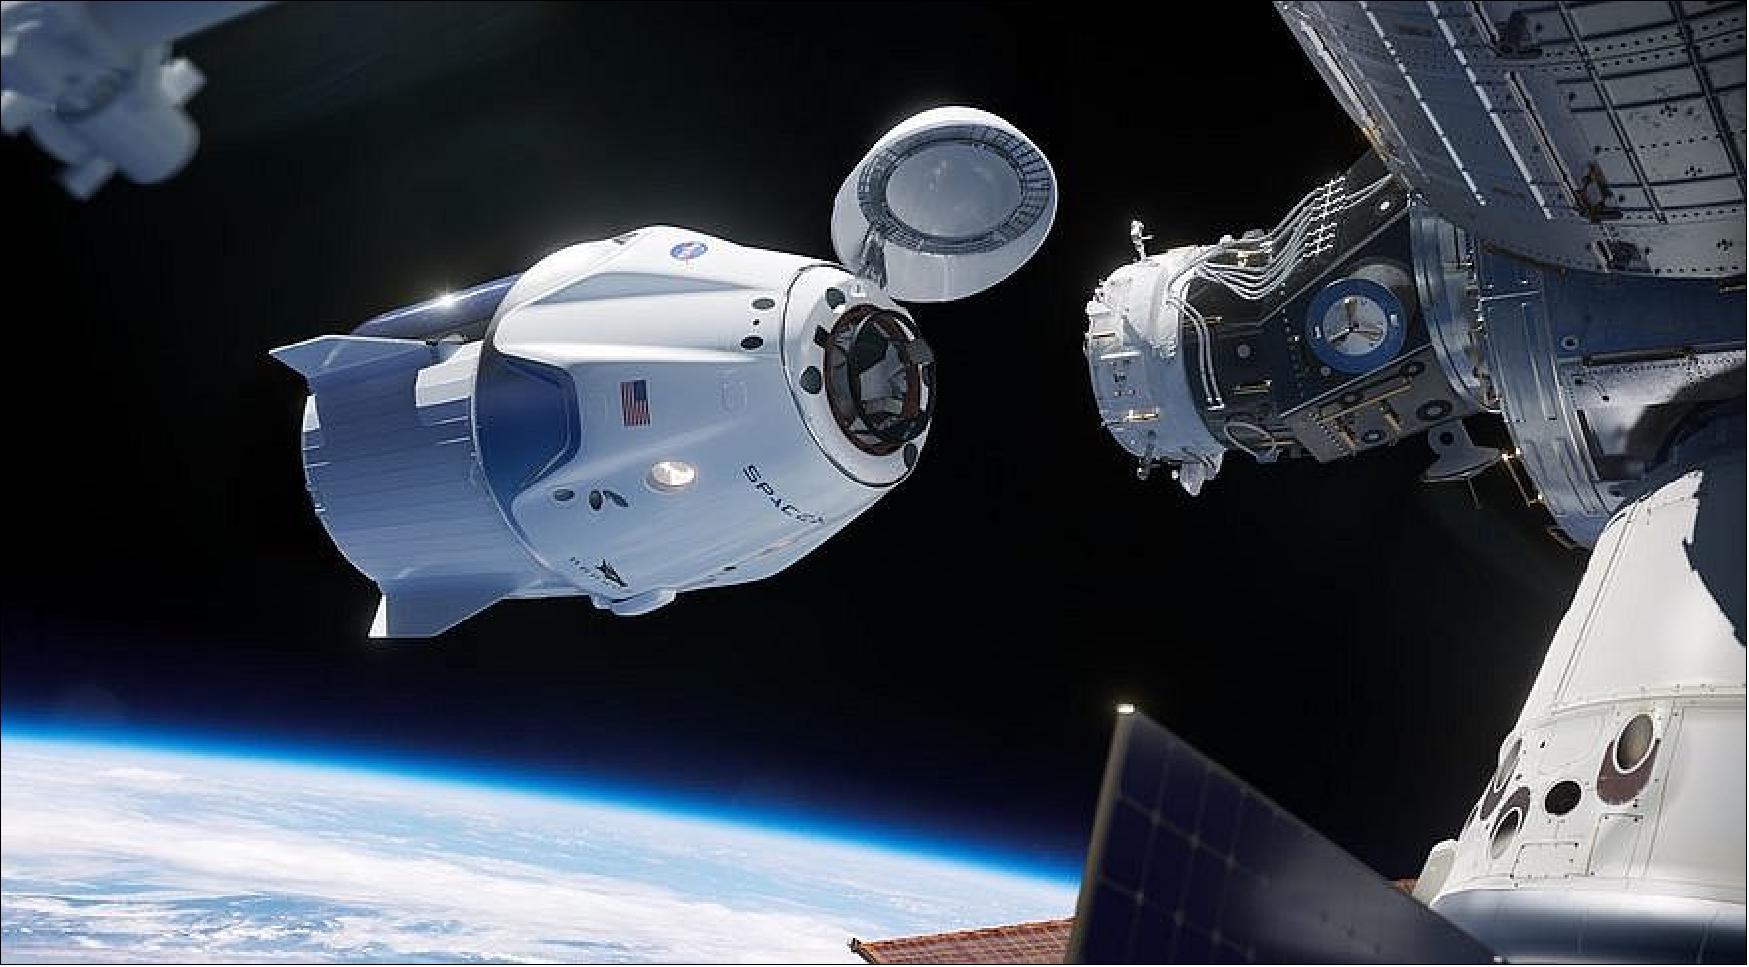 Figure 25: Axiom Space expects to finalize in the next few weeks its first commercial mission to the ISS, on a SpaceX Crew Dragon spacecraft in late 2021 (image credit: NASA)